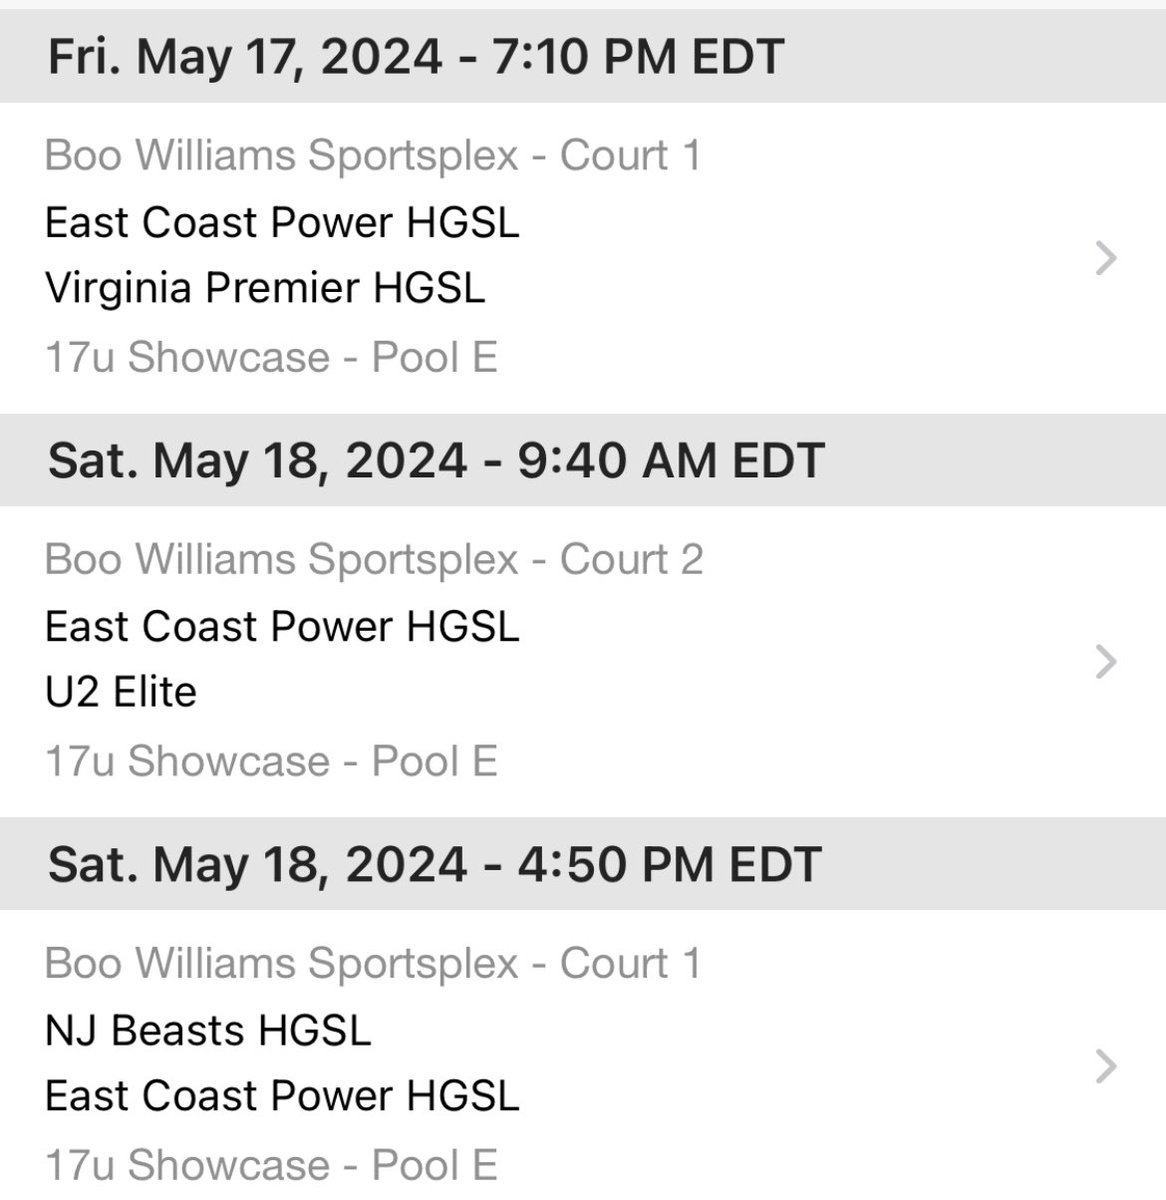 Live Period this weekend at the Boo Williams Sportsplex!